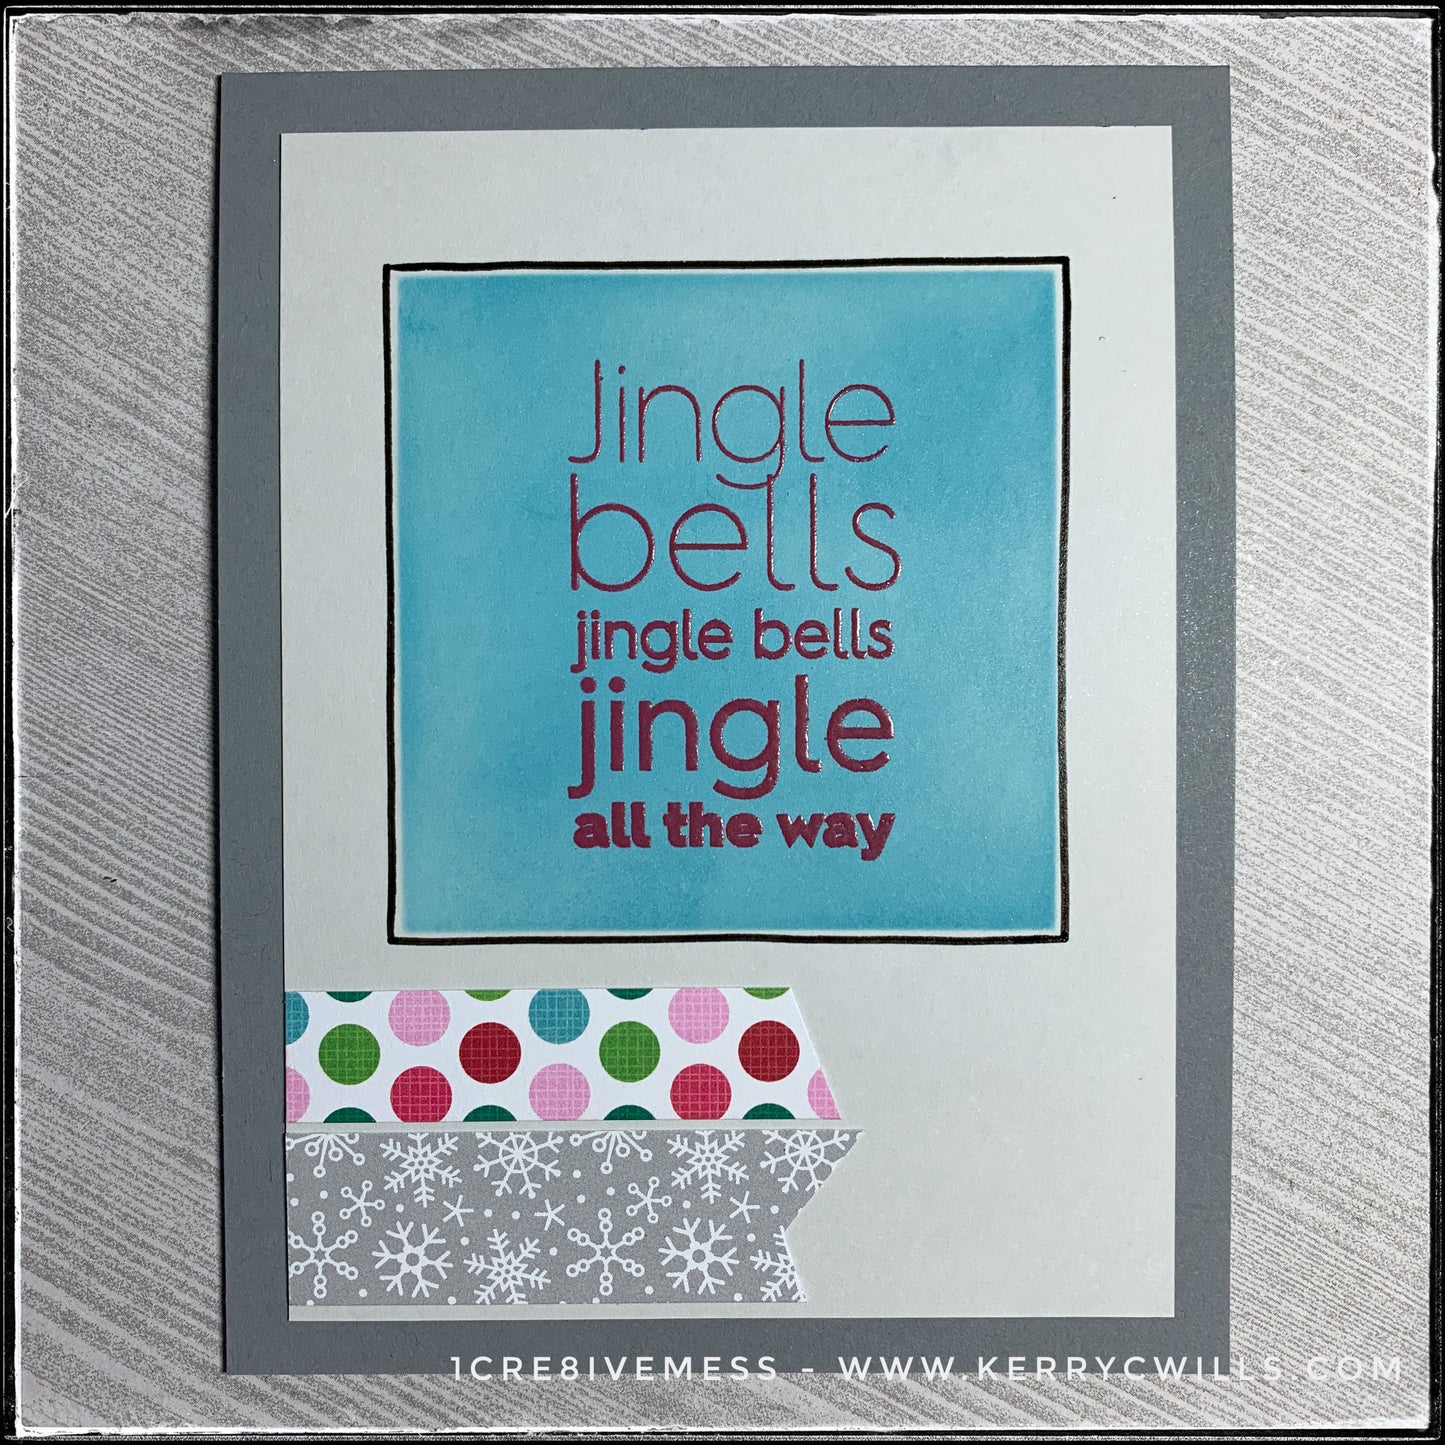 "Jingle bells jingle bells jingle all the way" is the sentiment on this clean and simple card. Two different patterns form two tiny banners near the bottom left corner of the card front. Hand drawn lines add a nice texture, as does the clear embossing of the sentiment. This card is wonderful for any and every winter holiday!